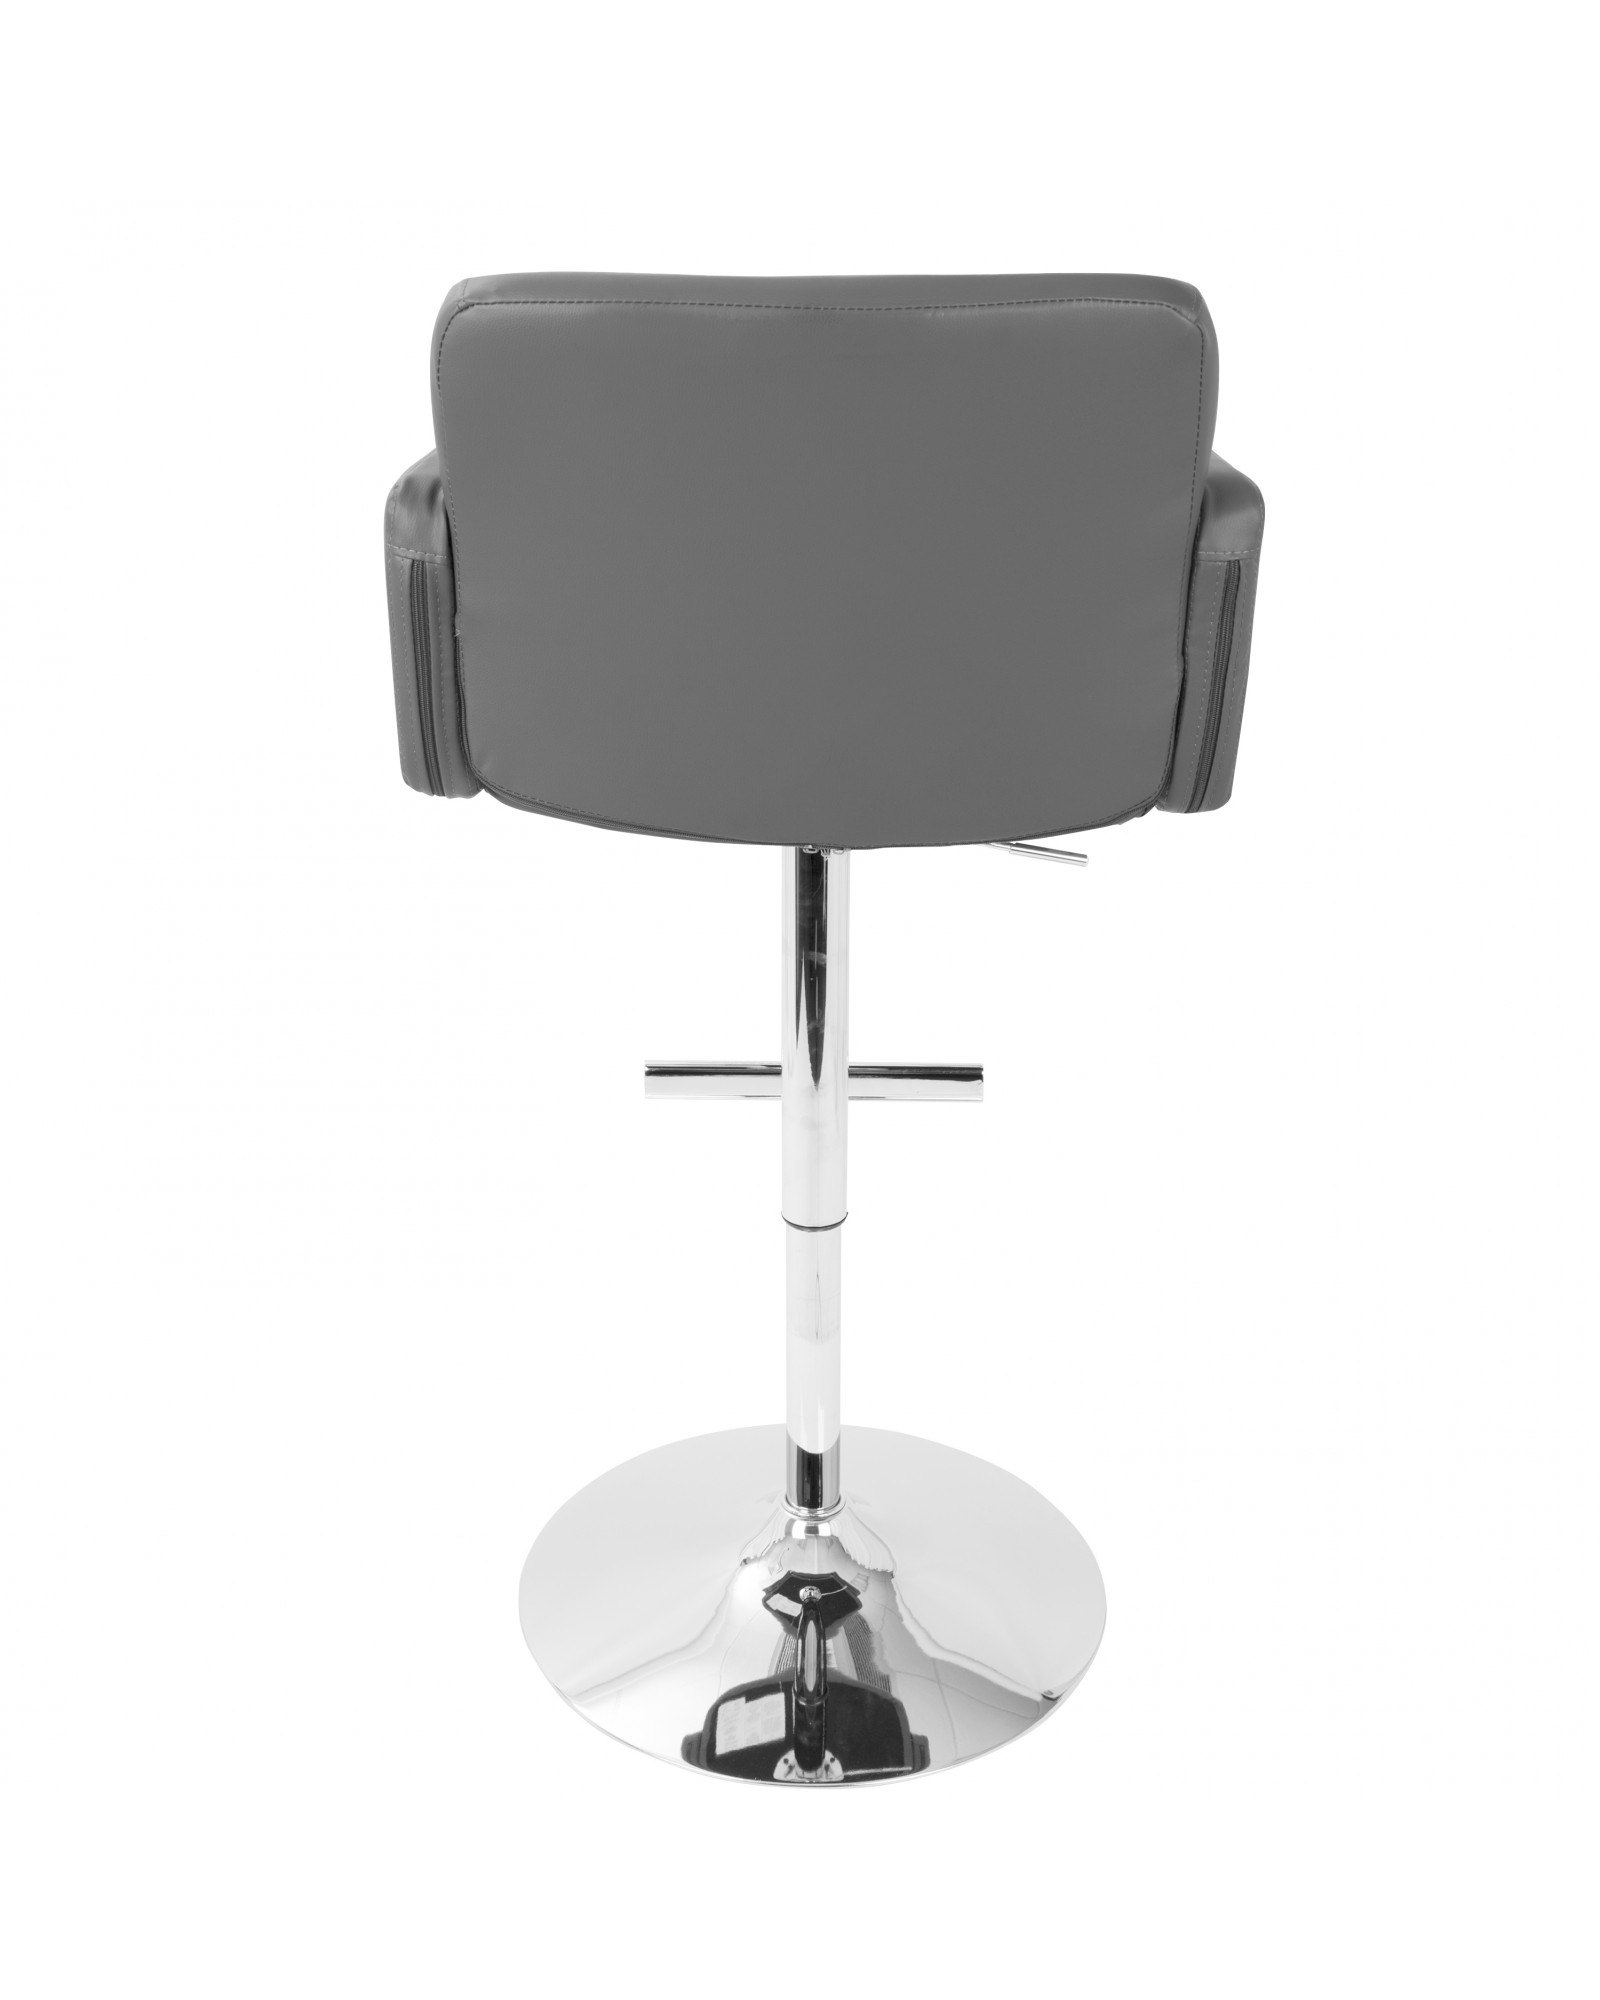 Stout Contemporary Adjustable Barstool with Swivel and Grey Faux Leather